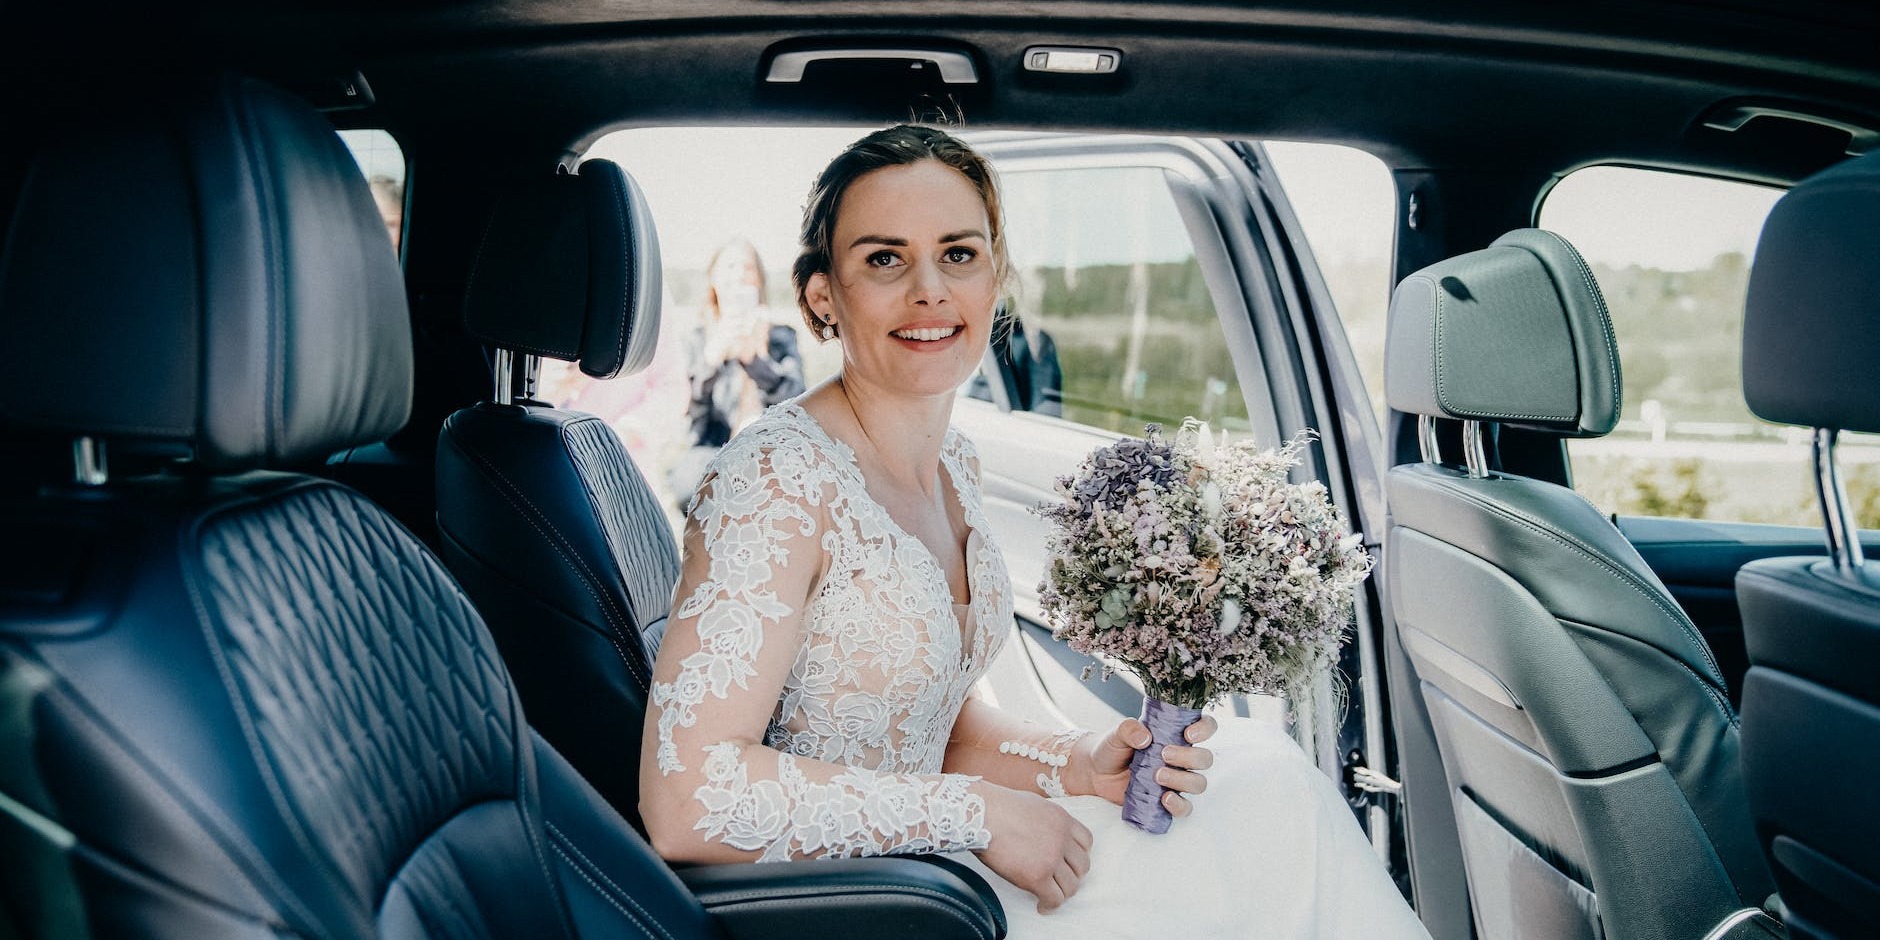 How to Choose the Perfect Wedding Car for Your Worksop Nuptials